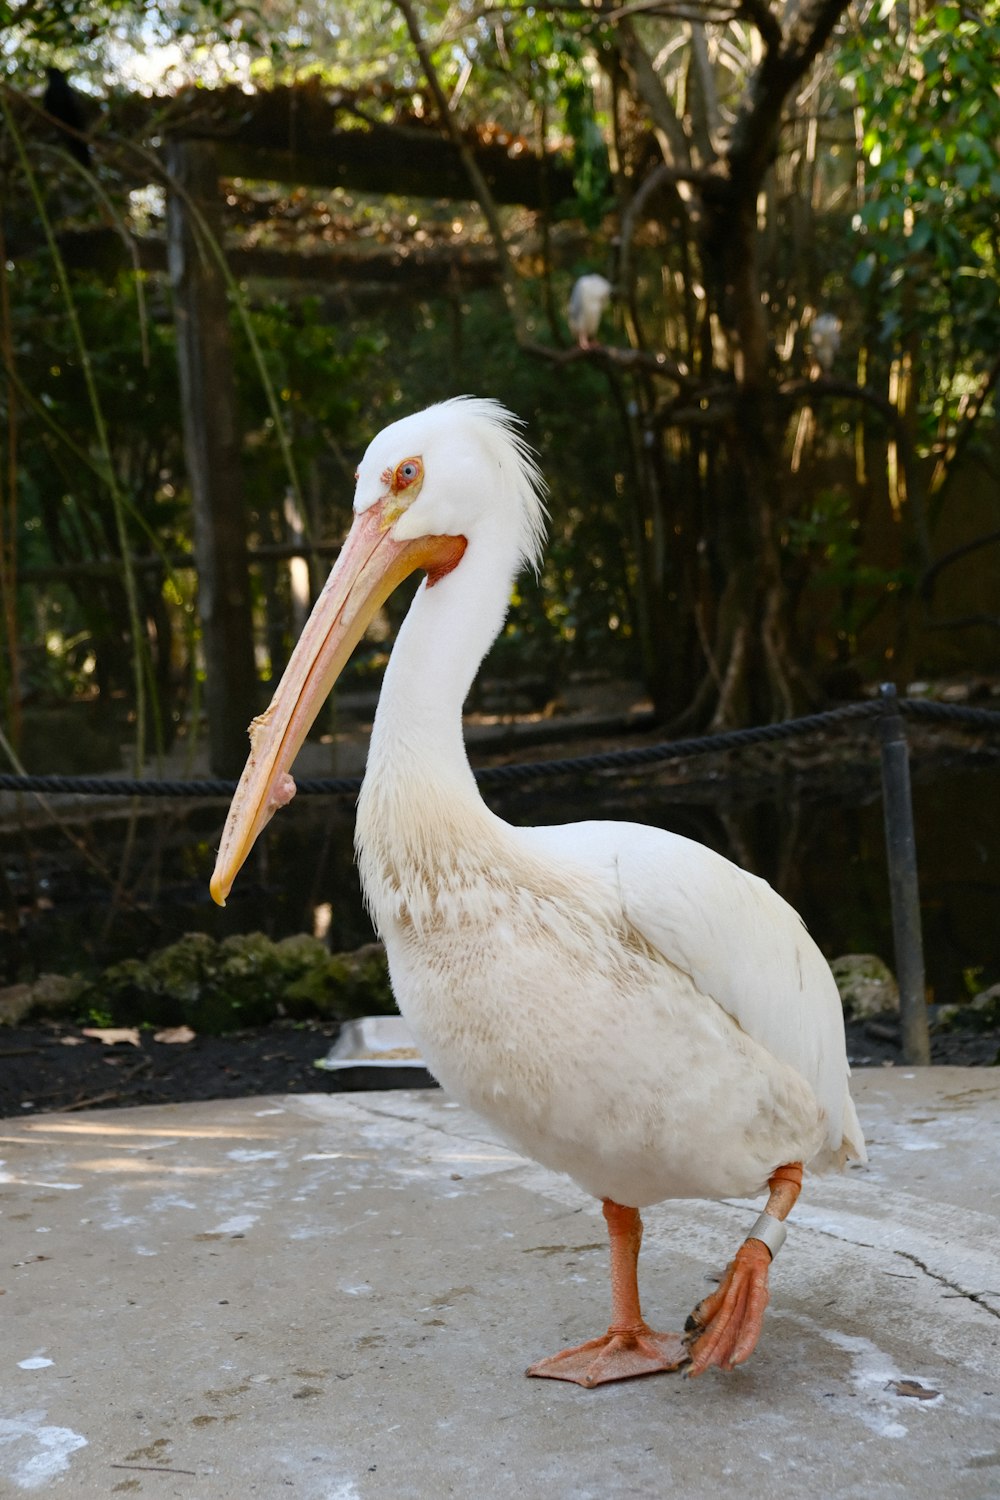 a large white bird with a long beak